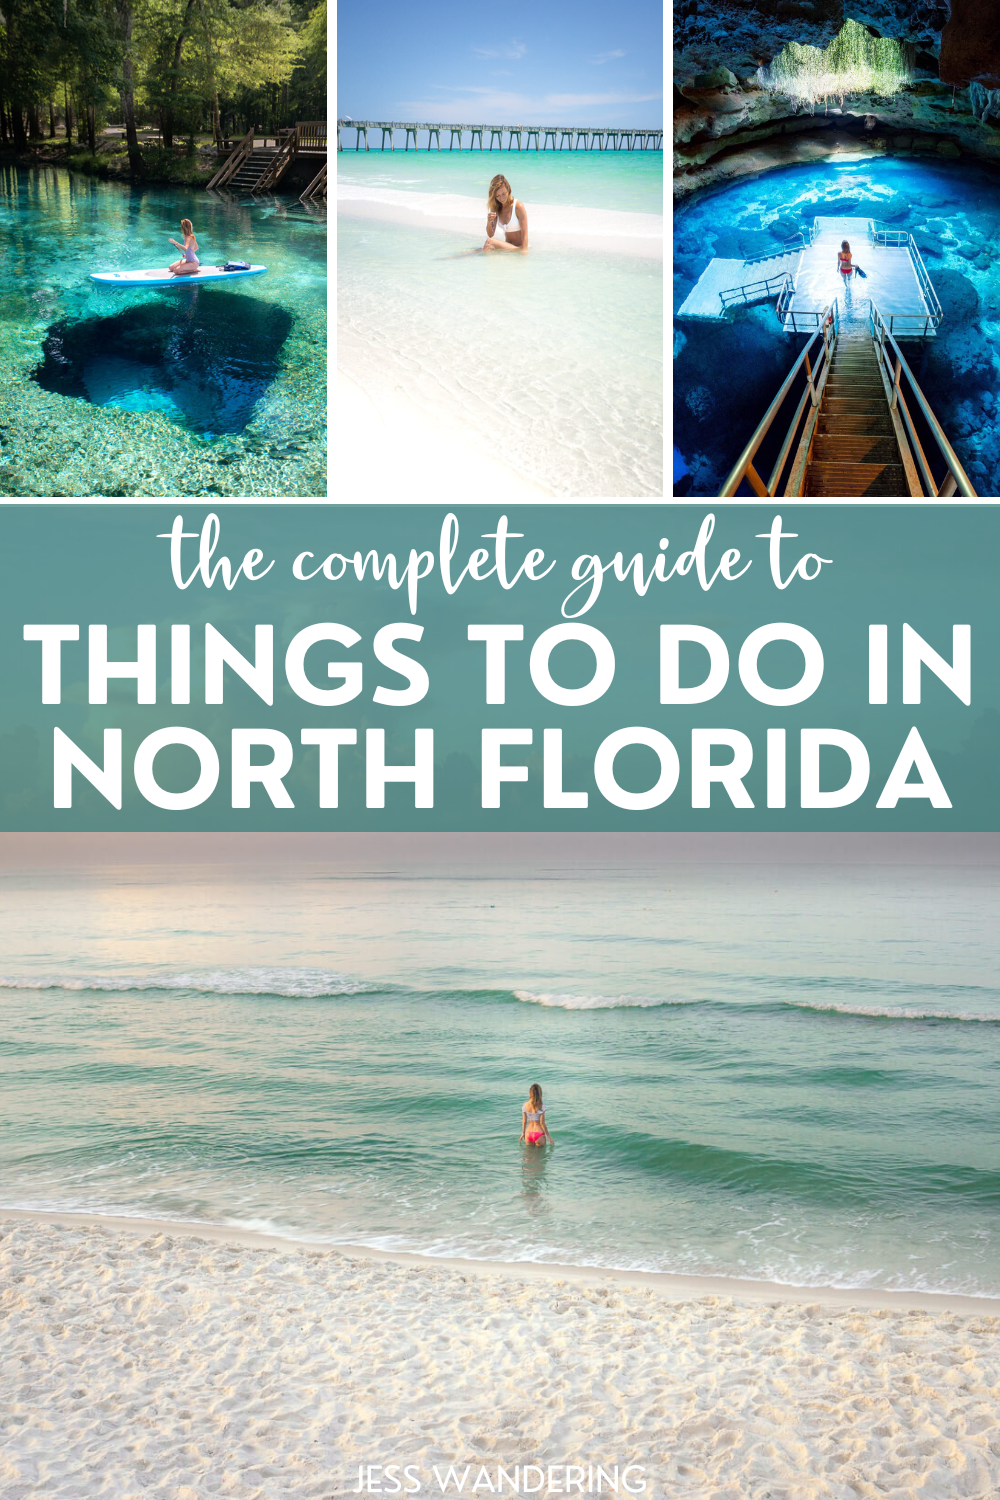 the complete guide to things to do in north florida with photos of florida beaches and florida springs